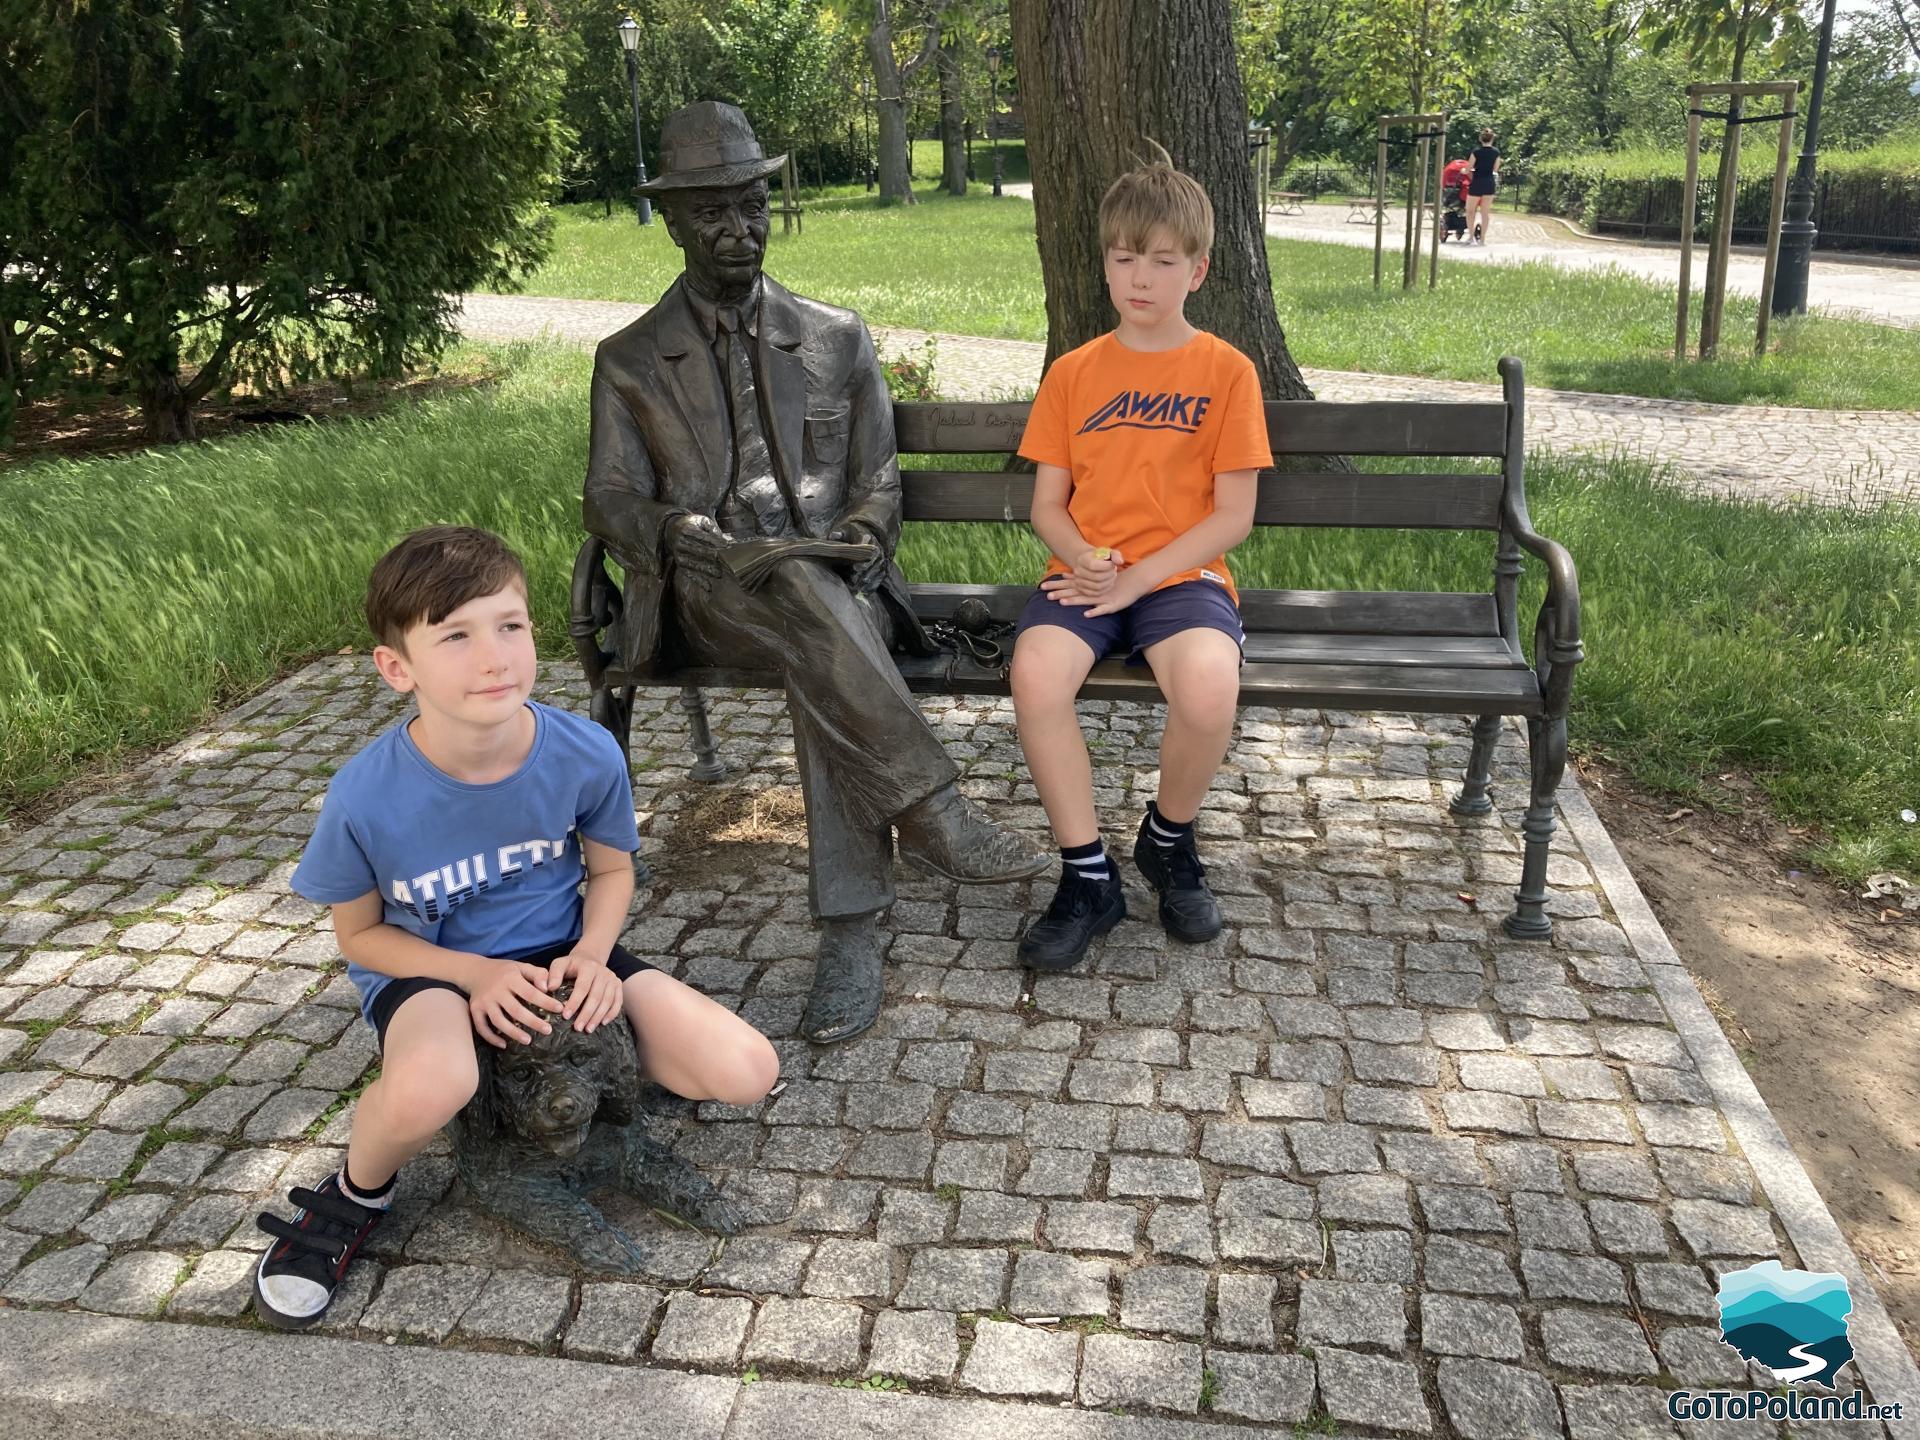 Two boys by the sculpture of a man